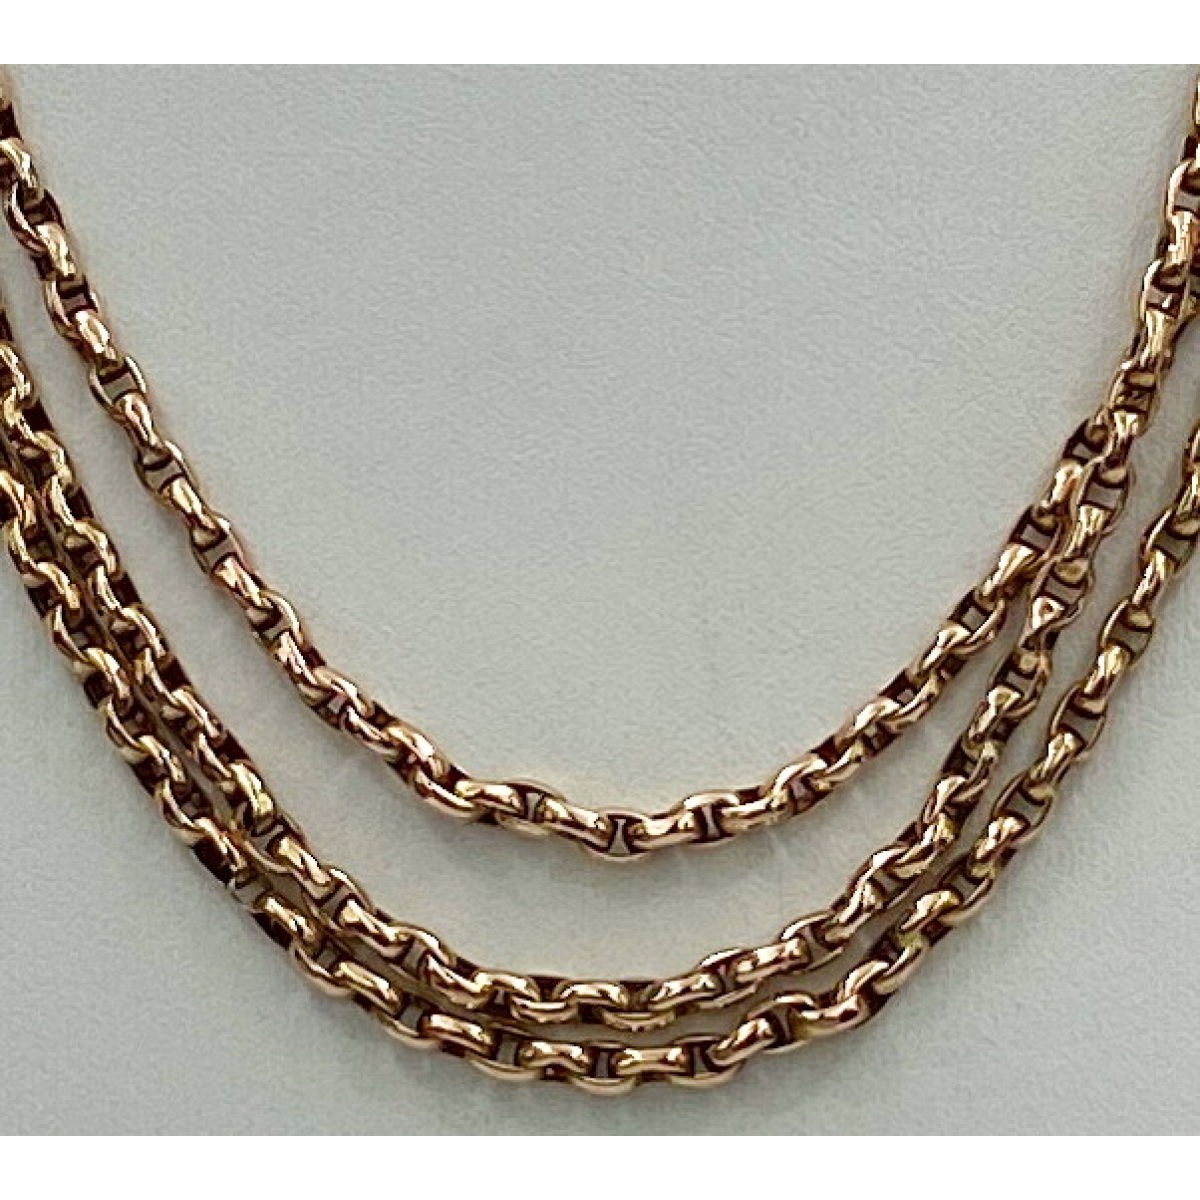 48" Wheat Link Antique English Gold Chain - Serviceable Length